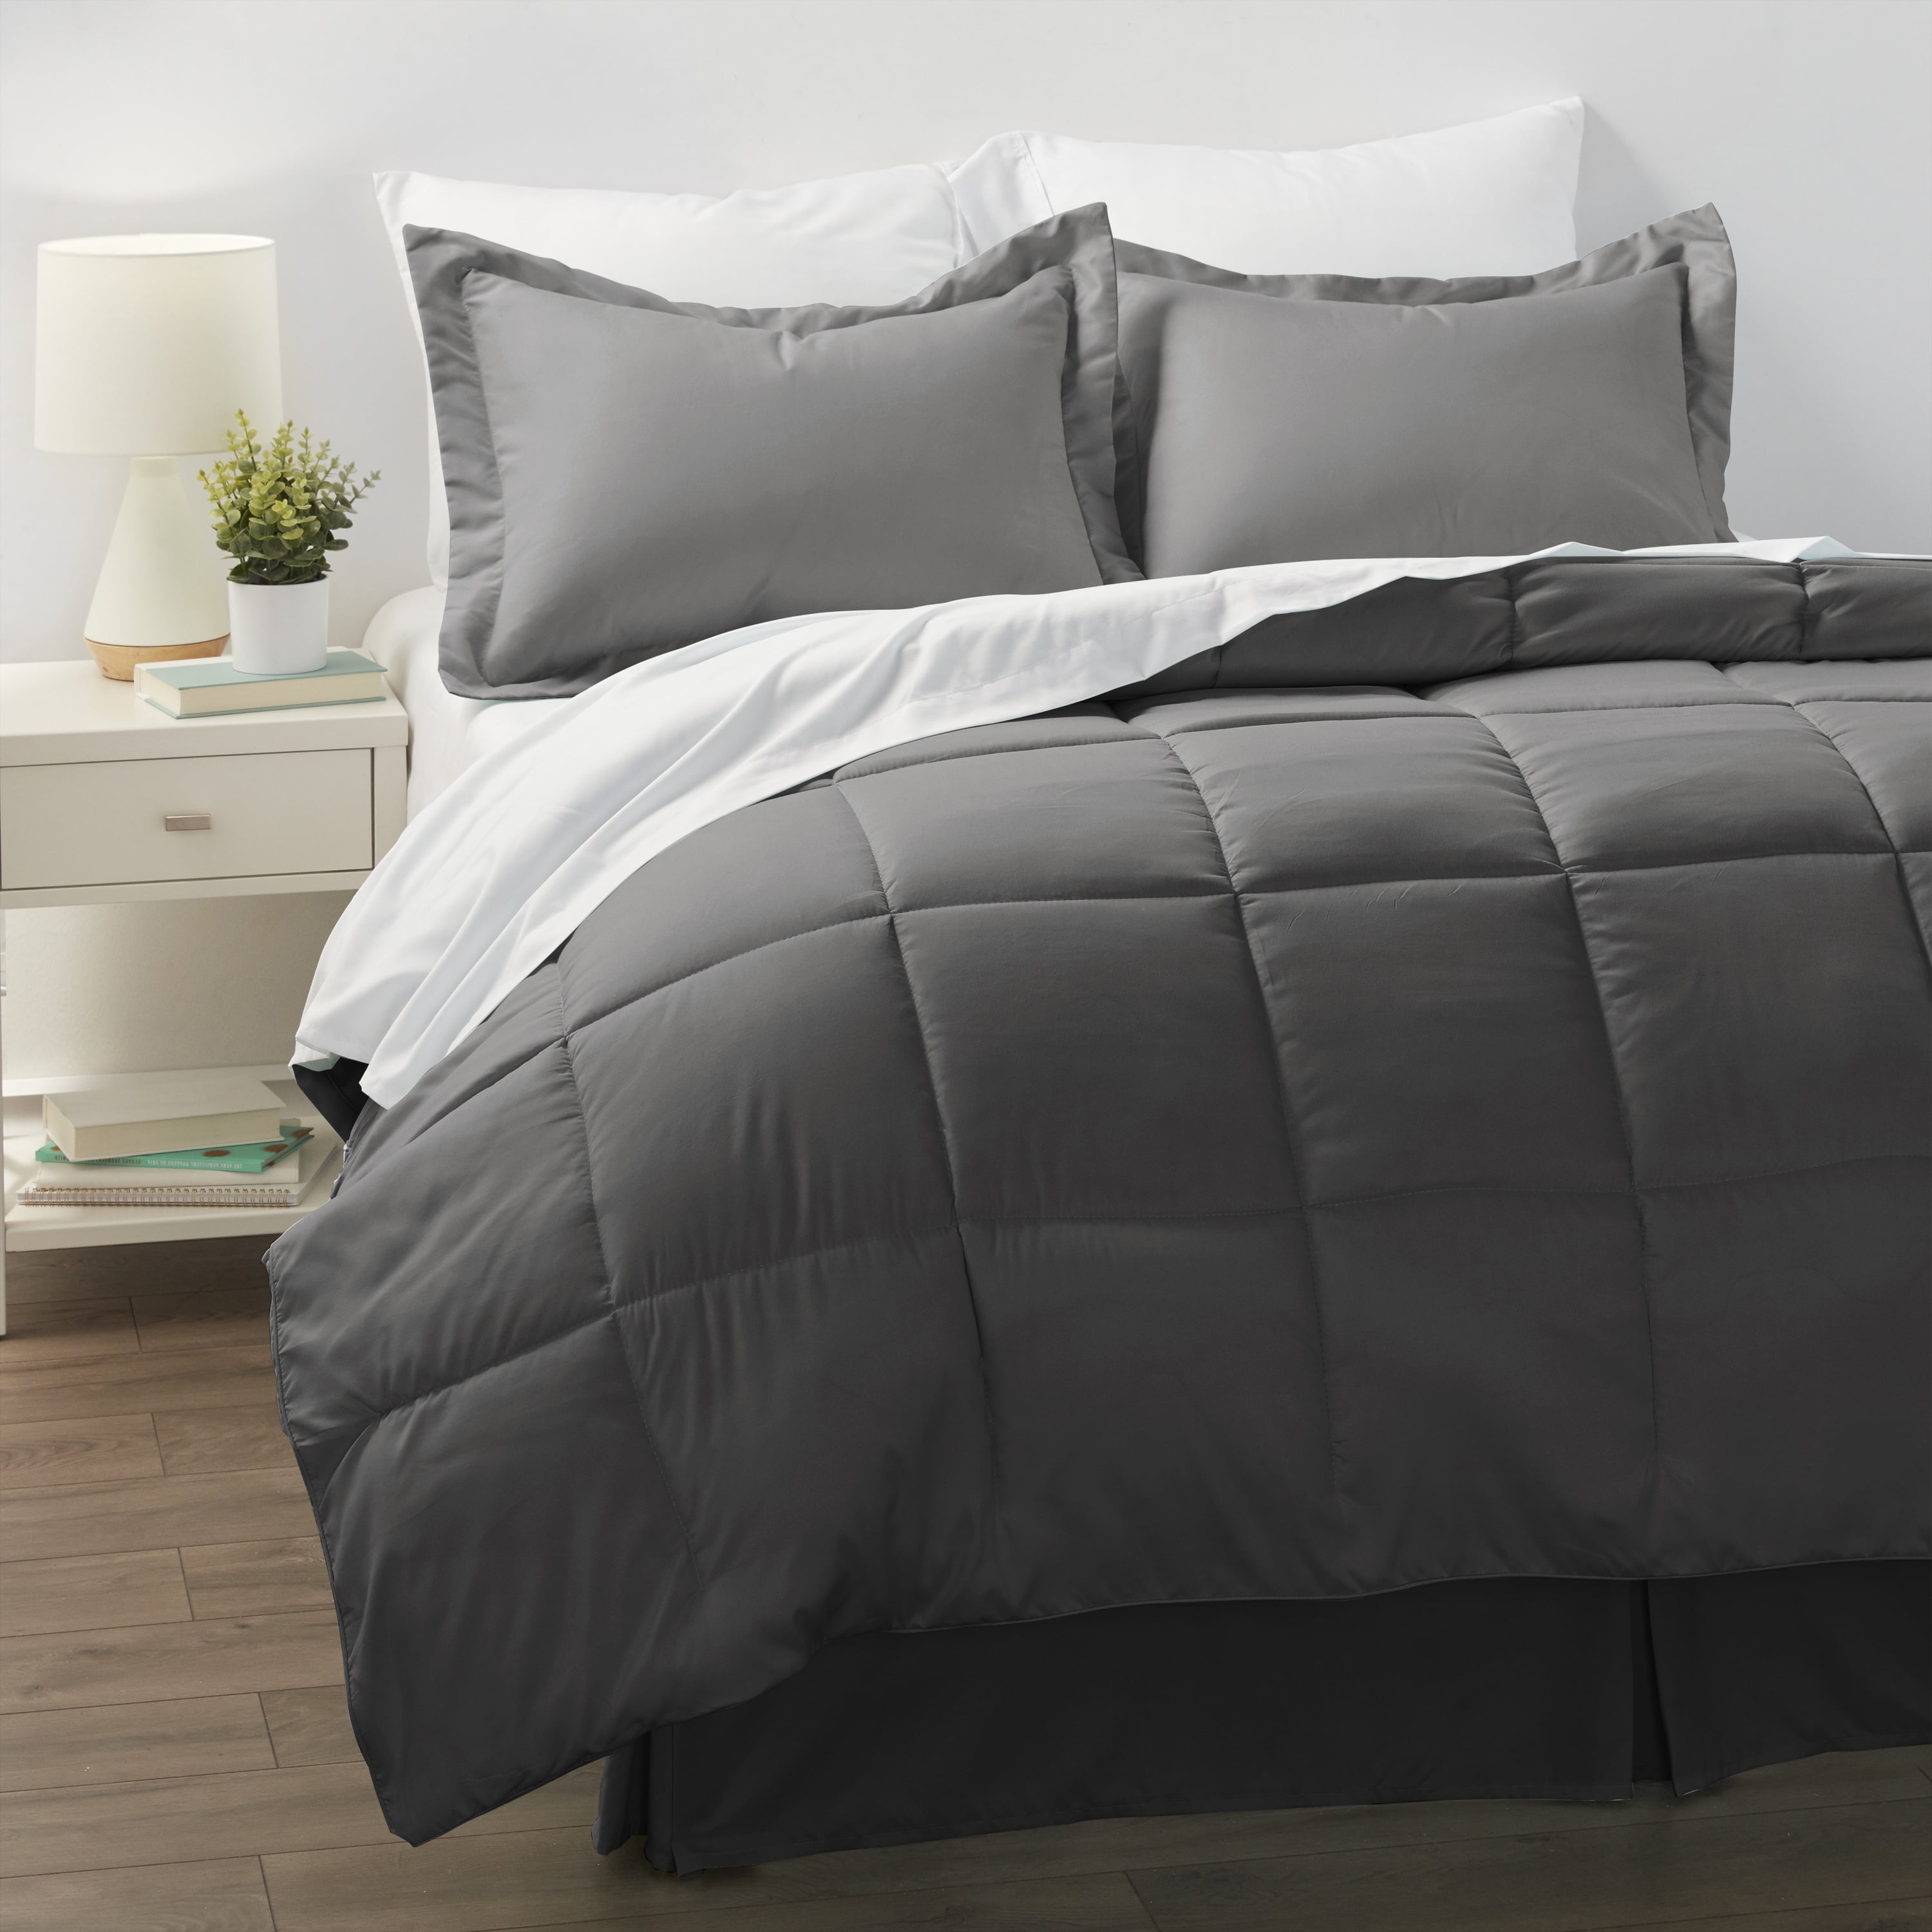 BLACK GRAY BEDDING COMFORTER SET 8-Piece Bed in a Bag Multiple Sizes 